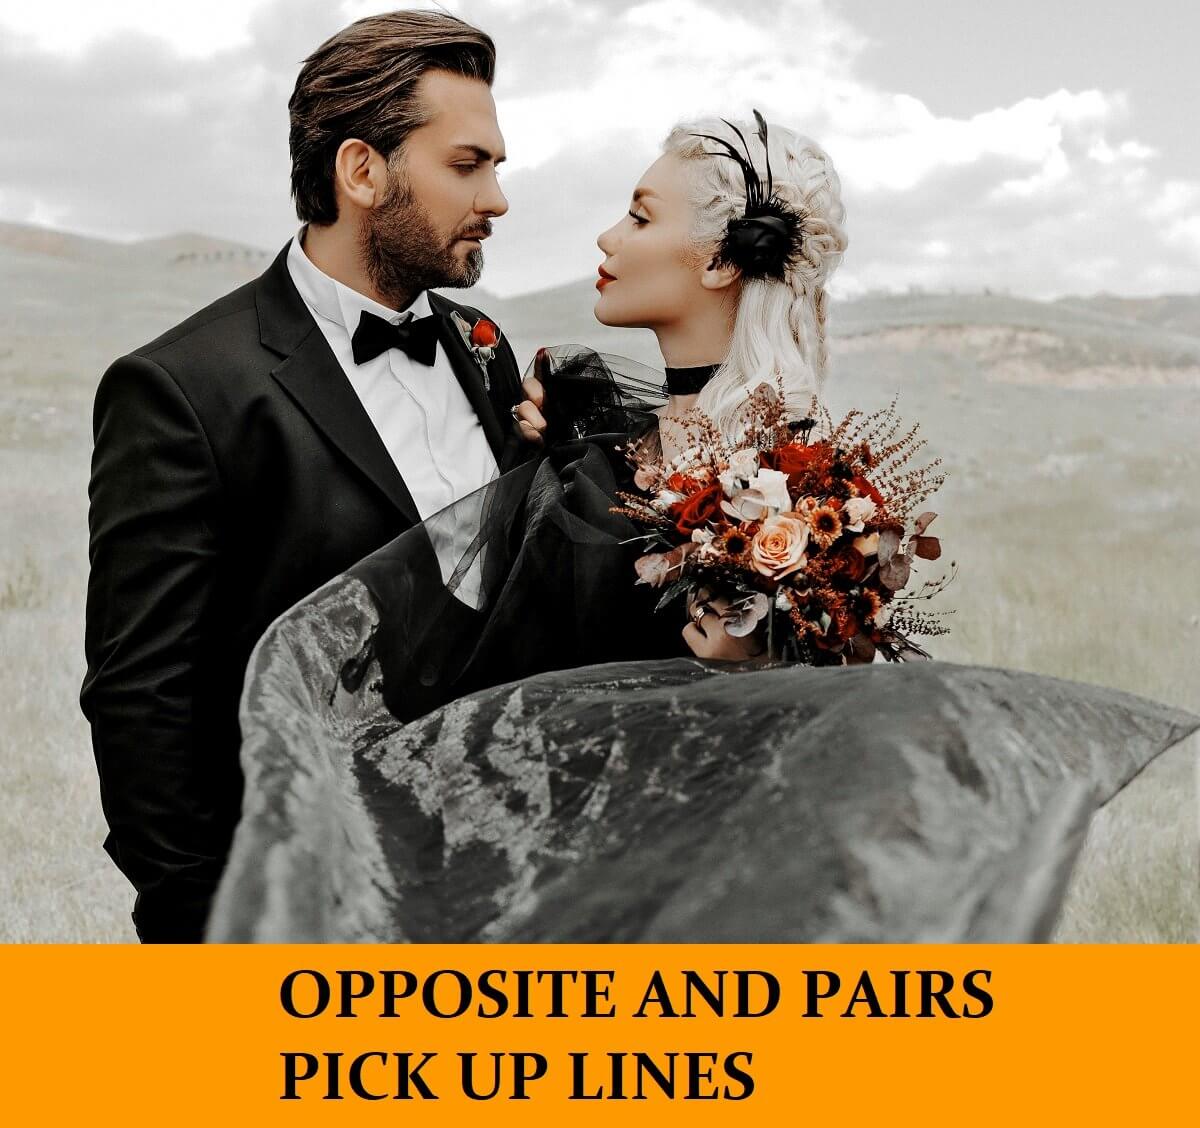 Pick Up Lines Inspired by Complementary Opposite and Pairs